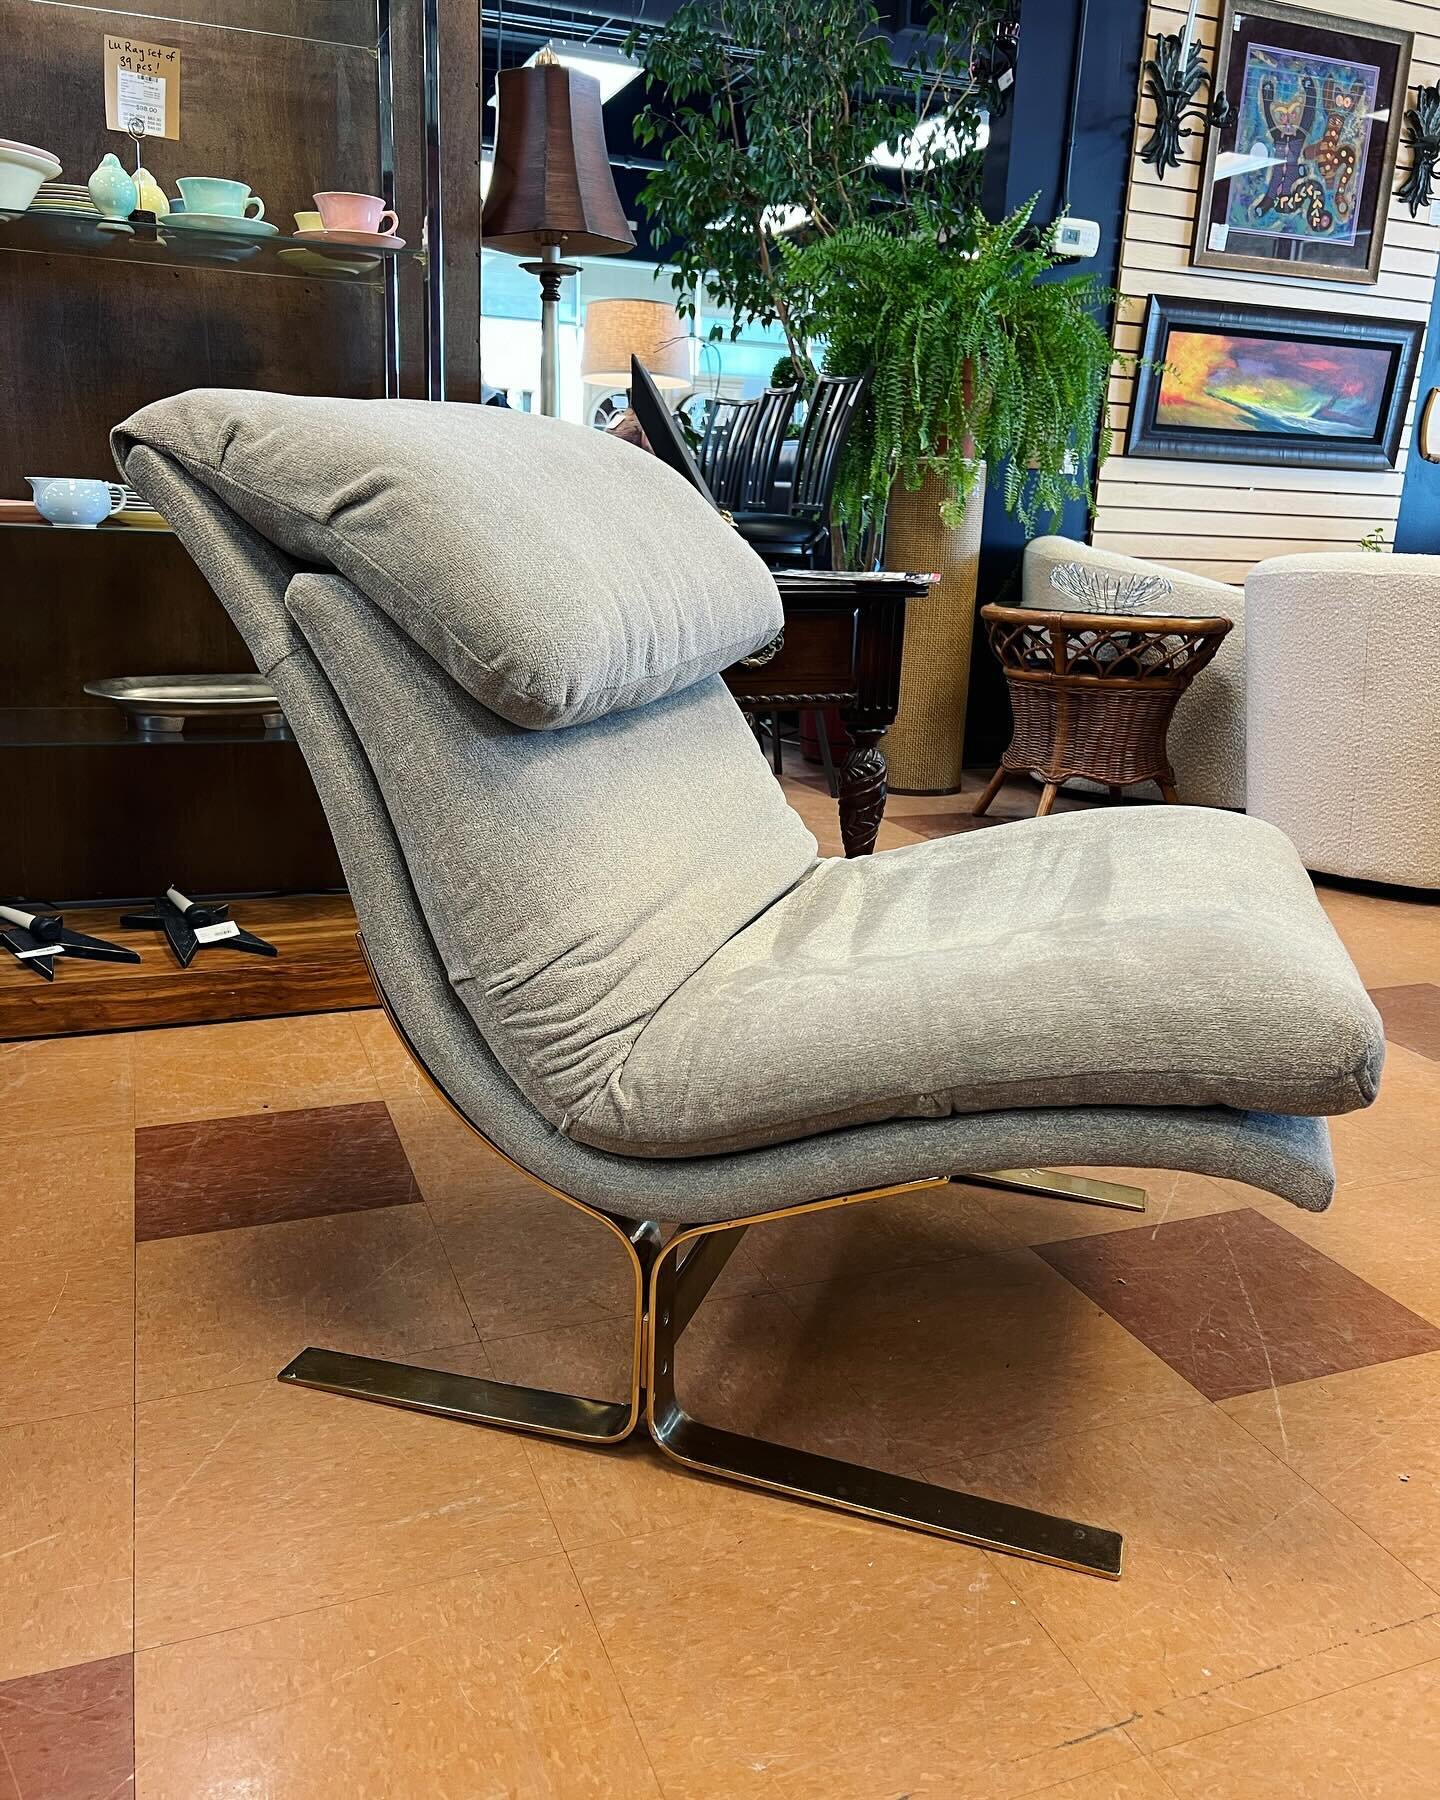 Mid Century and comfortable!